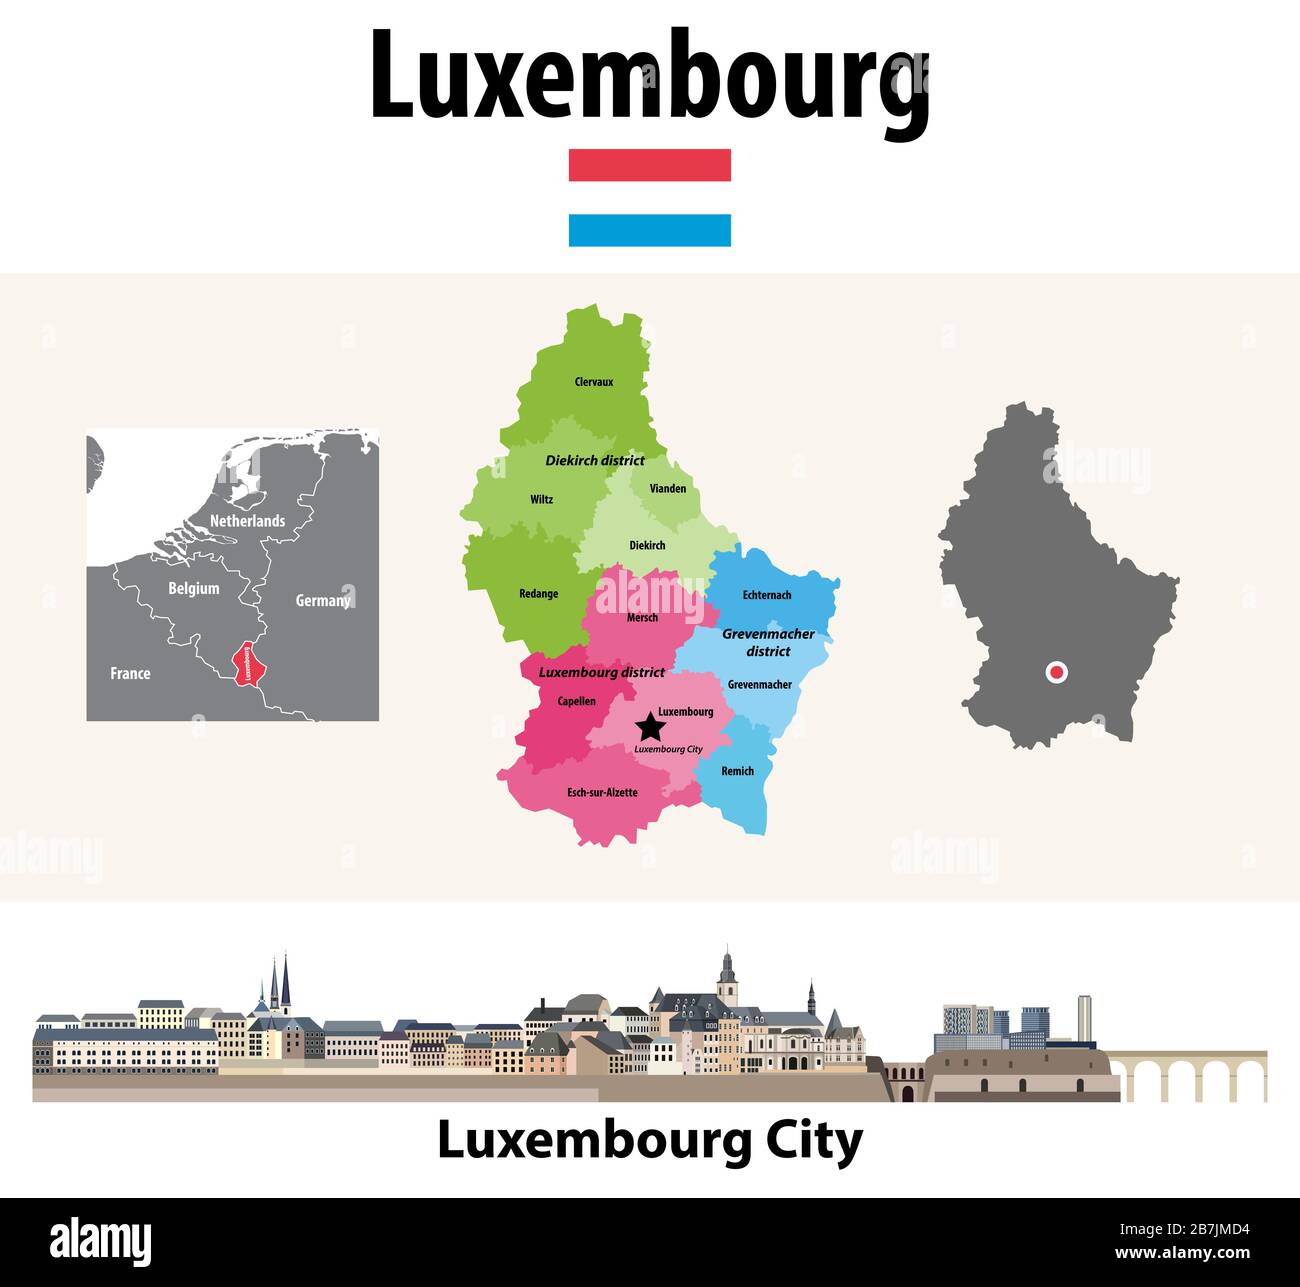 map of Luxemourg regions colored by distrcits. Luxembourg City cityscape. Vector illustration Stock Vector